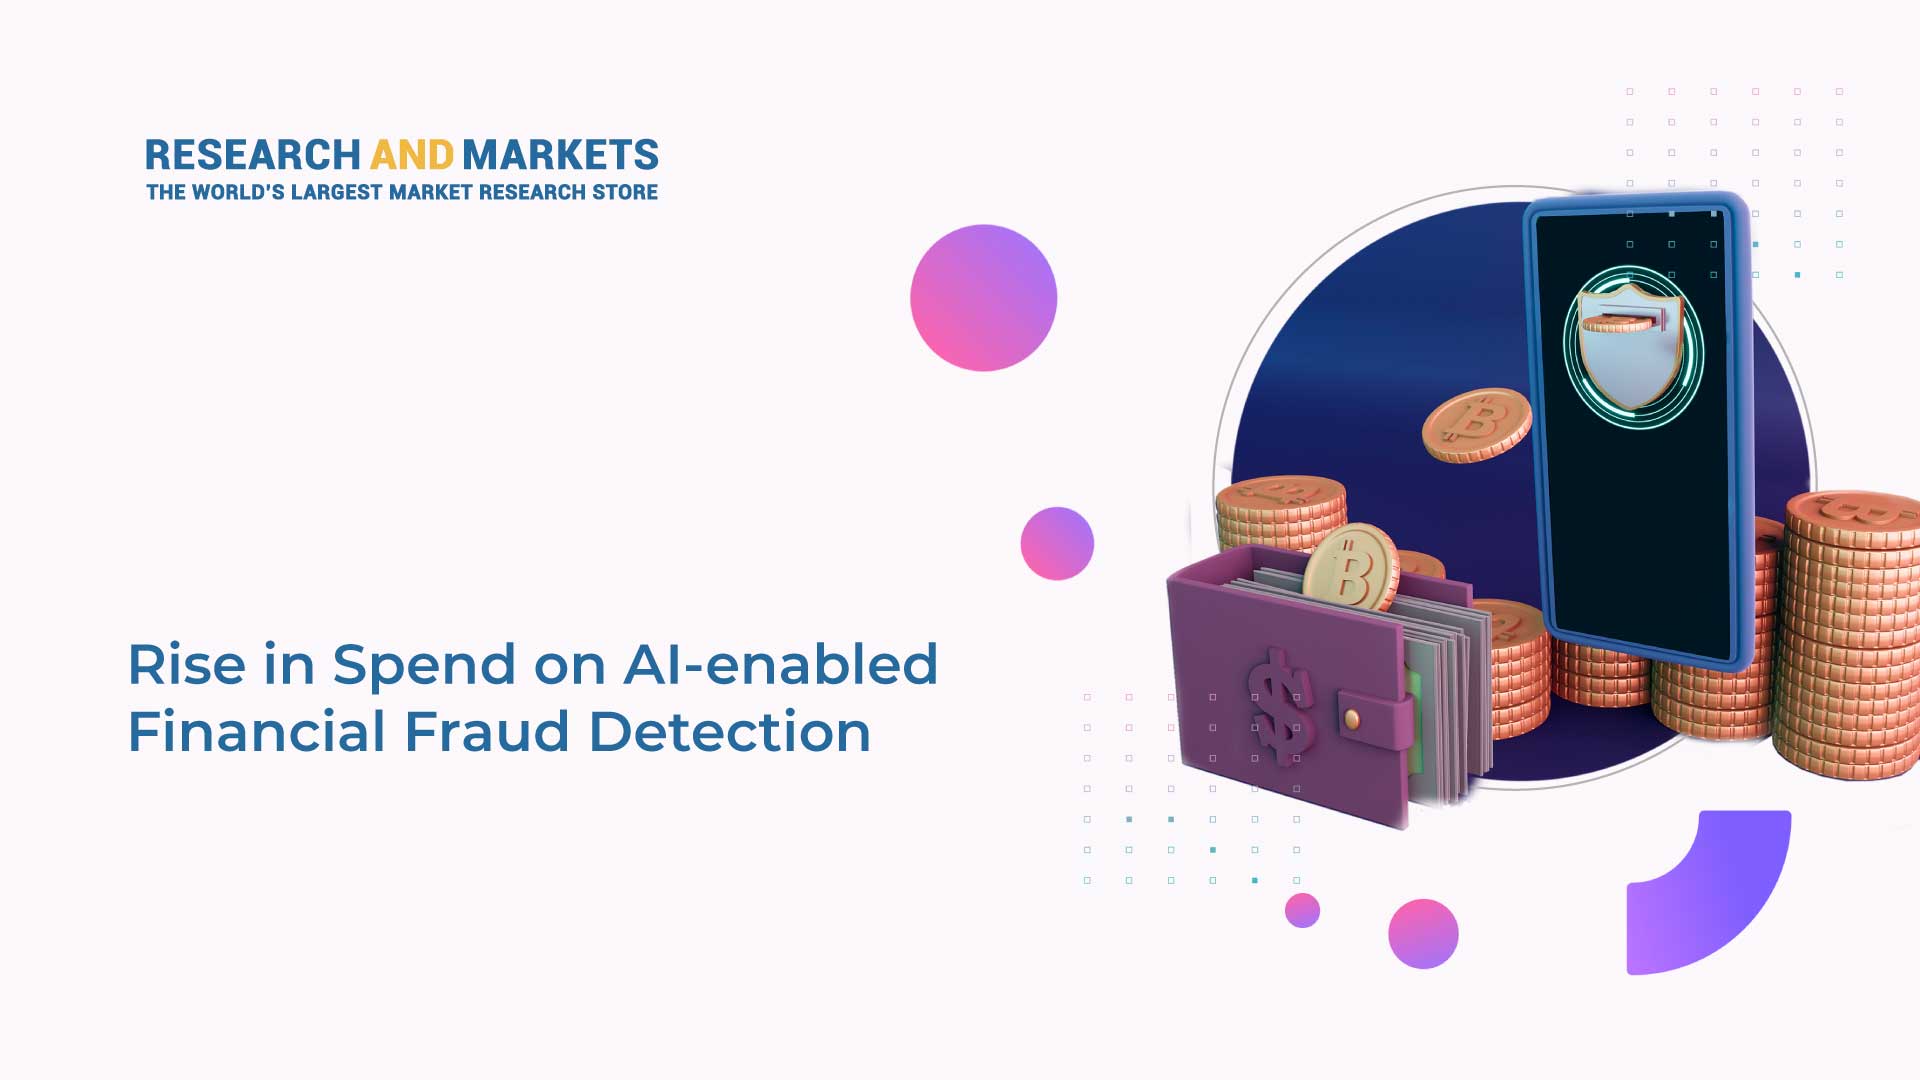 AI in Financial Fraud Detection Global Market Report 2022: AI-enabled Financial Fraud Detection Spend to Exceed $10 Billion by 2027